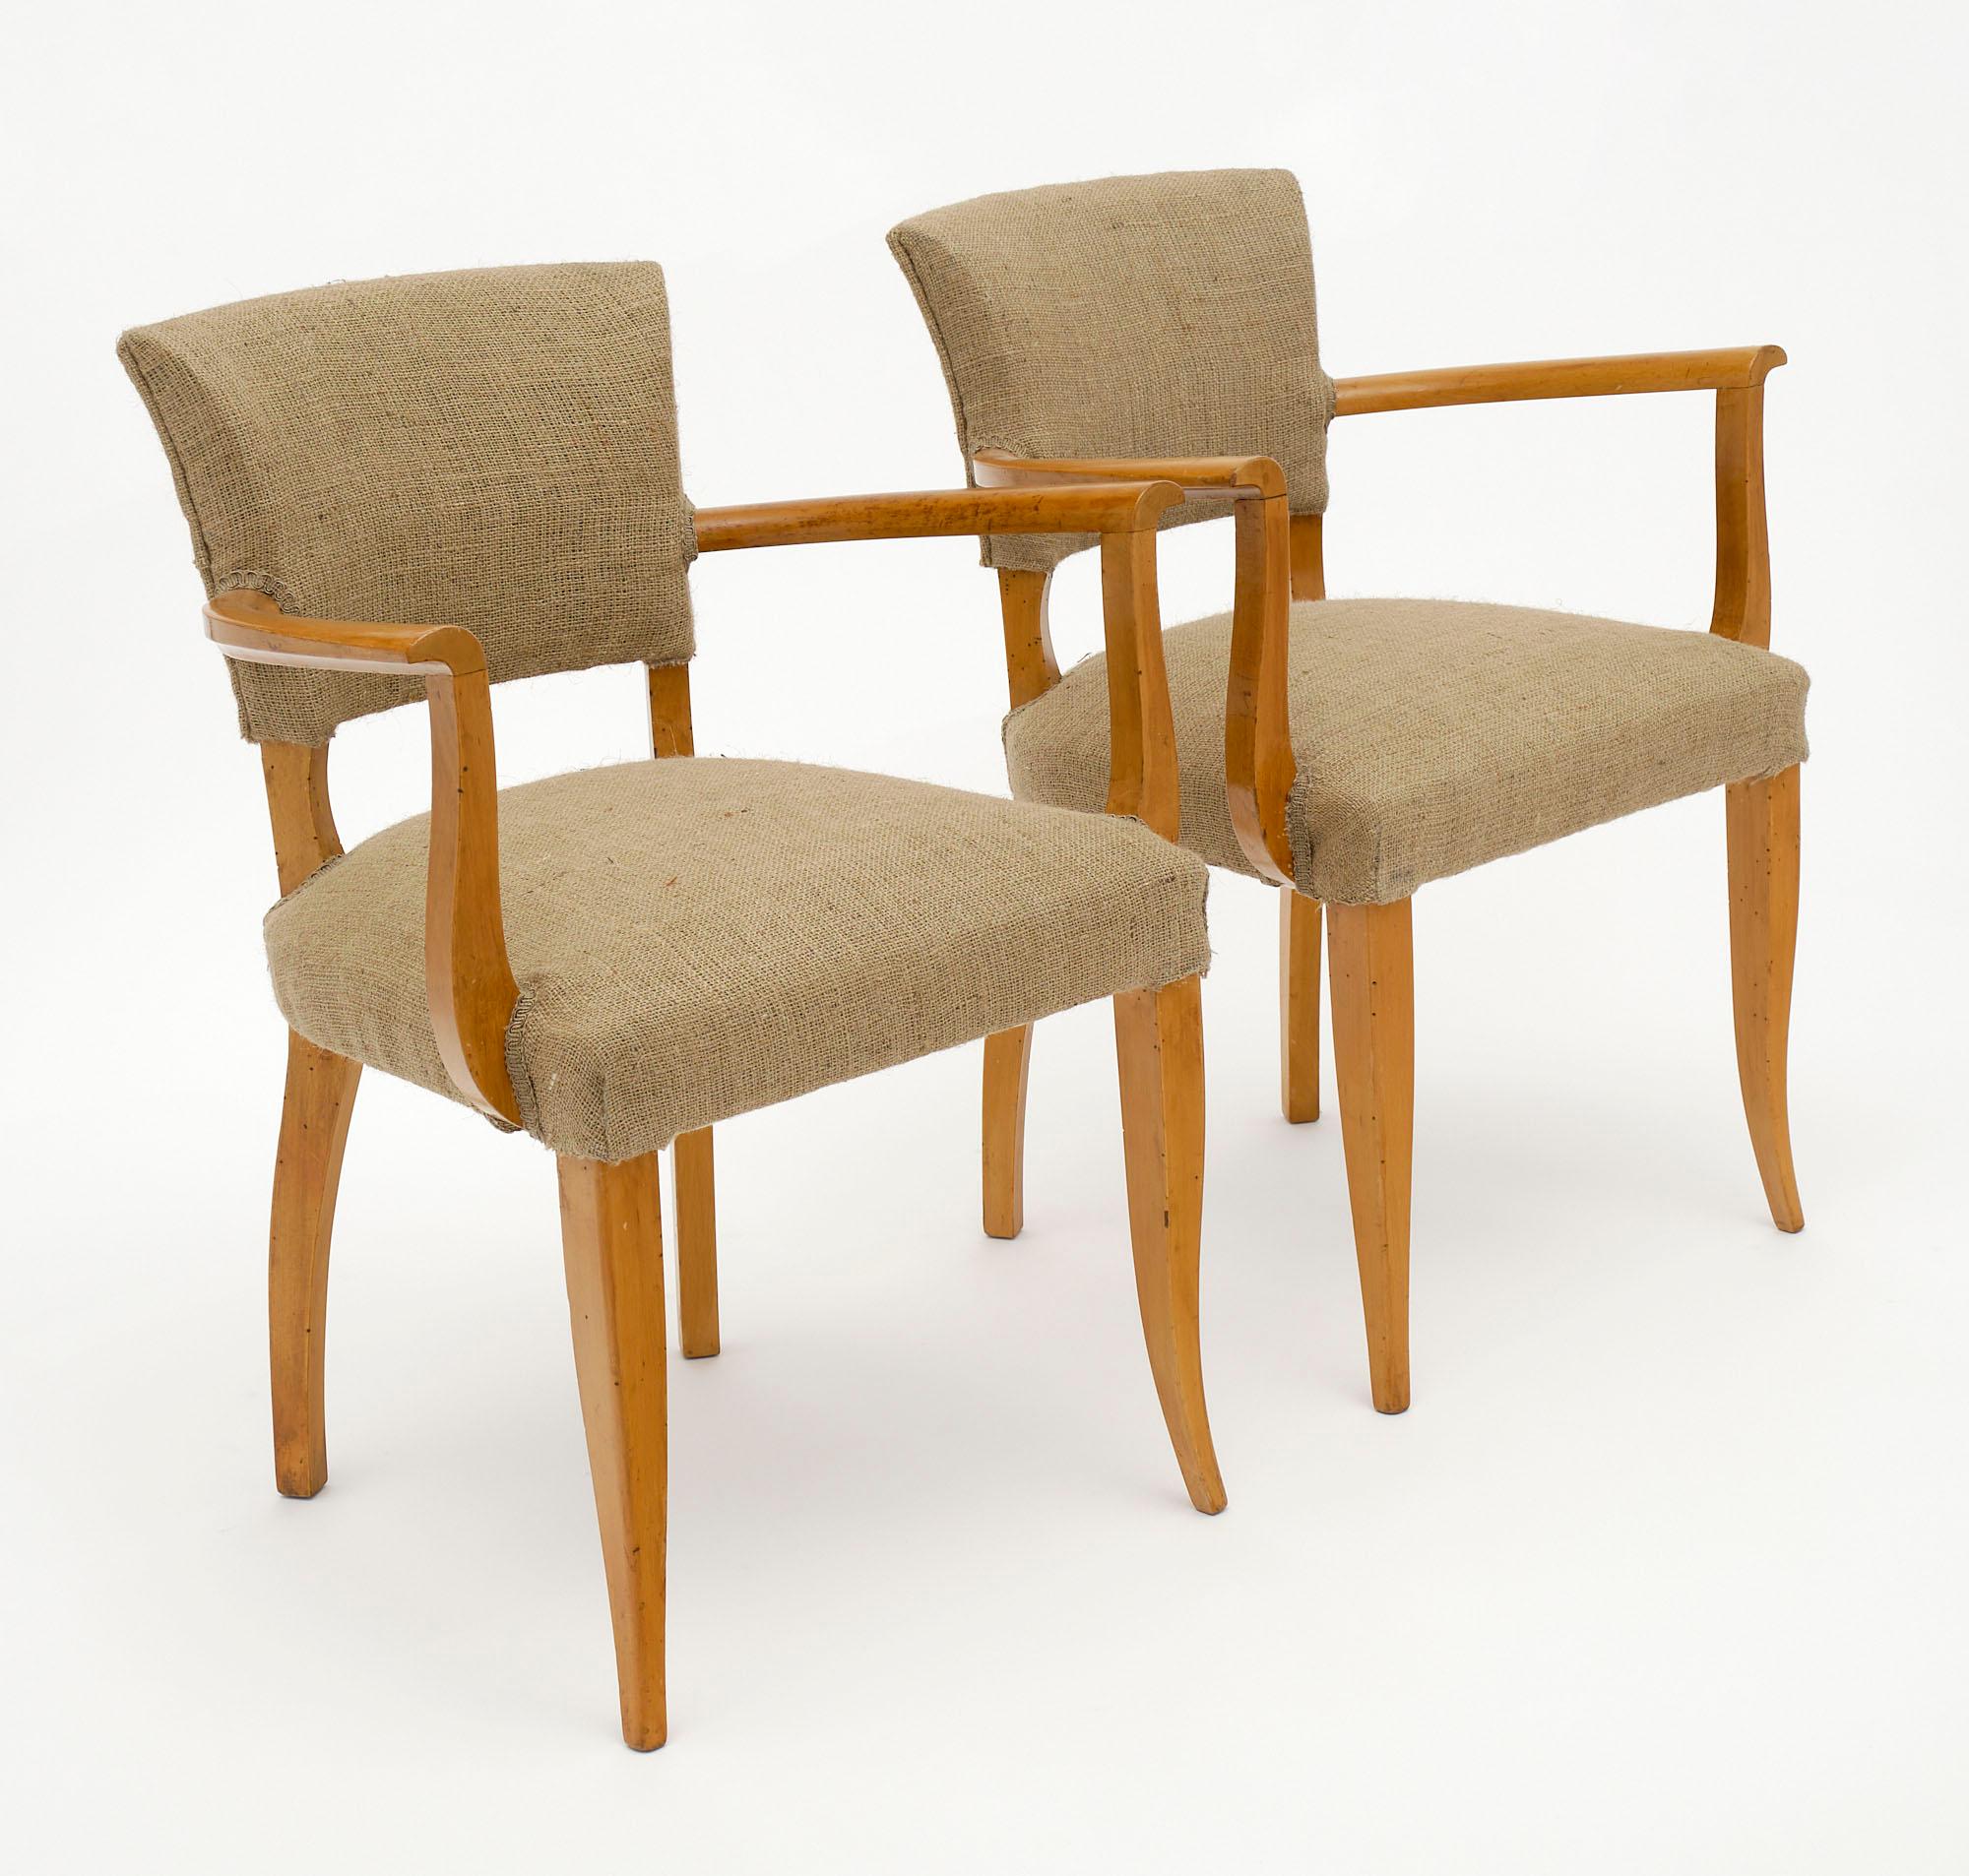 Pair of bridge chairs from the Art Deco period in France. This beautiful pair have strong; well-crafted structures of fruit wood finished in a lustrous museum-quality French polish. They have been newly upholstered in burlap. We love the classic Art